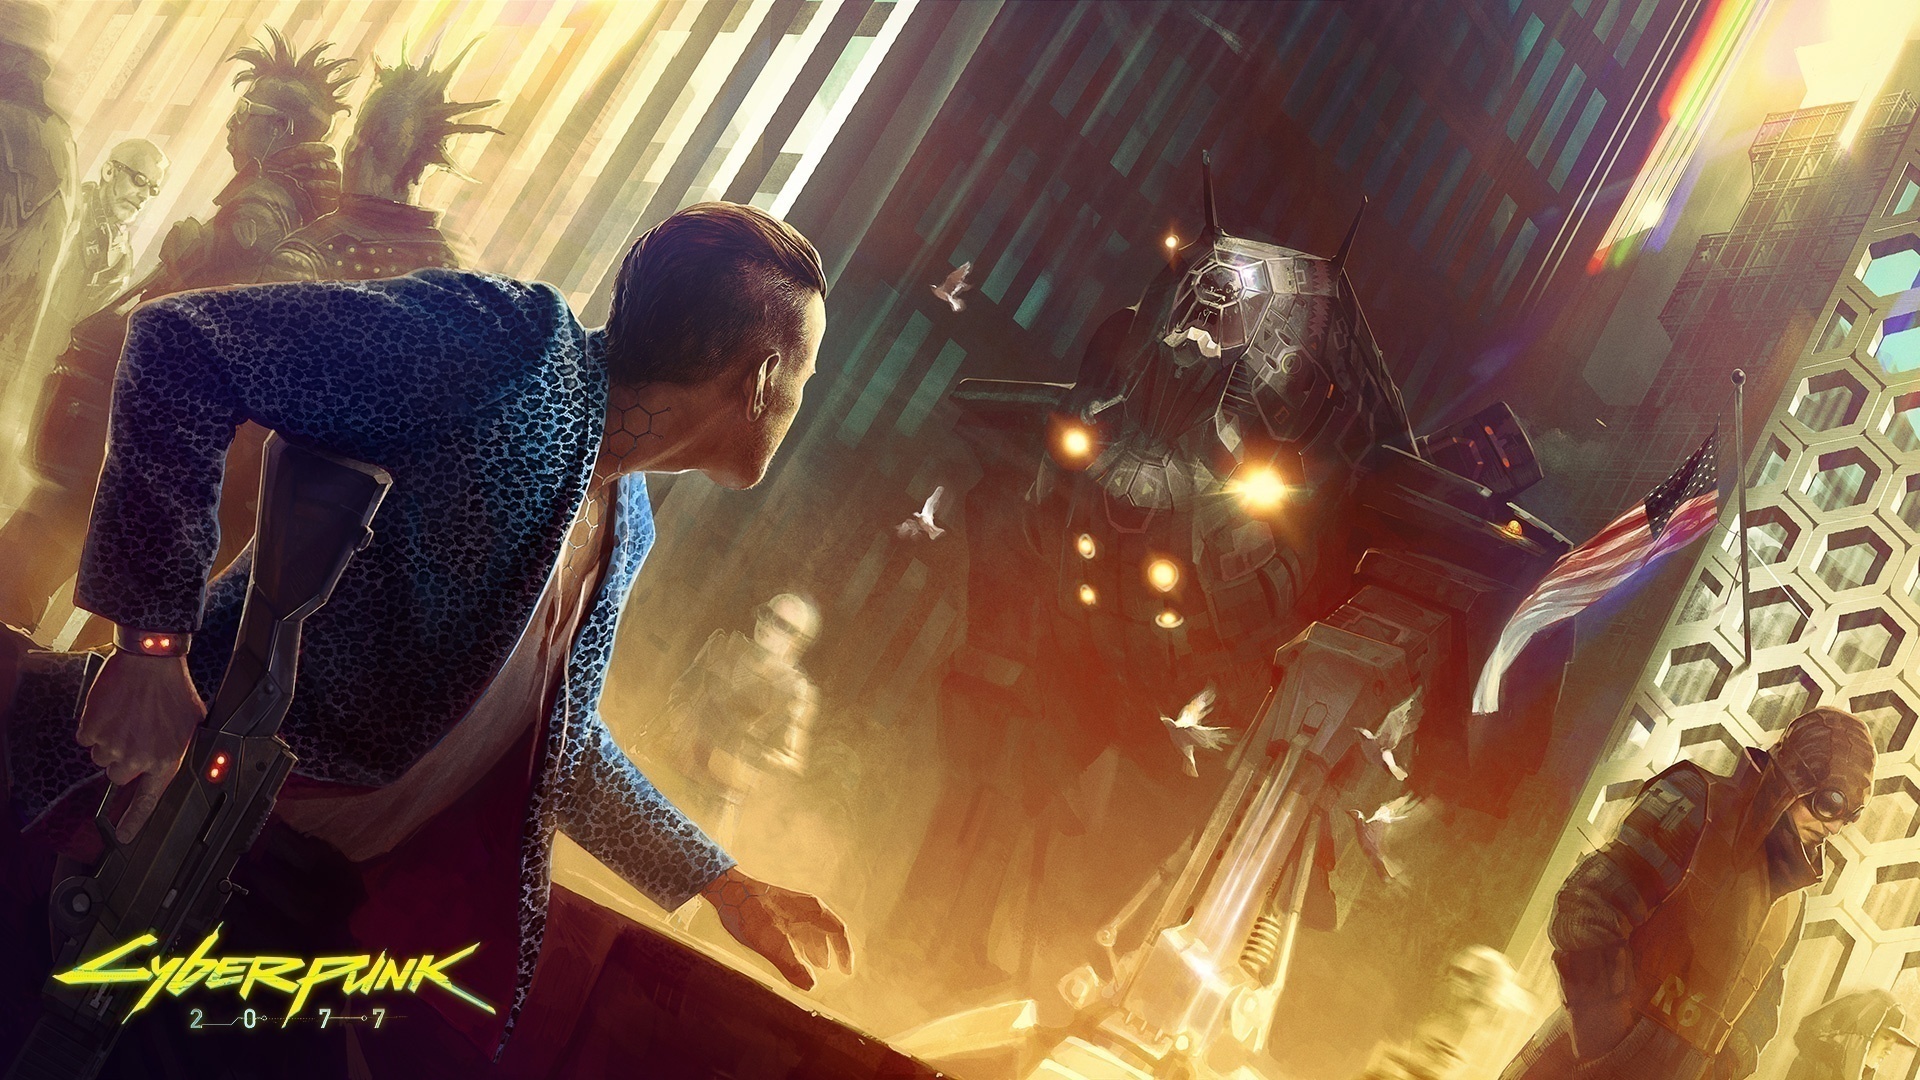 Cyberpunk 2077 will include online elements to ensure long-term success, says CD Projekt